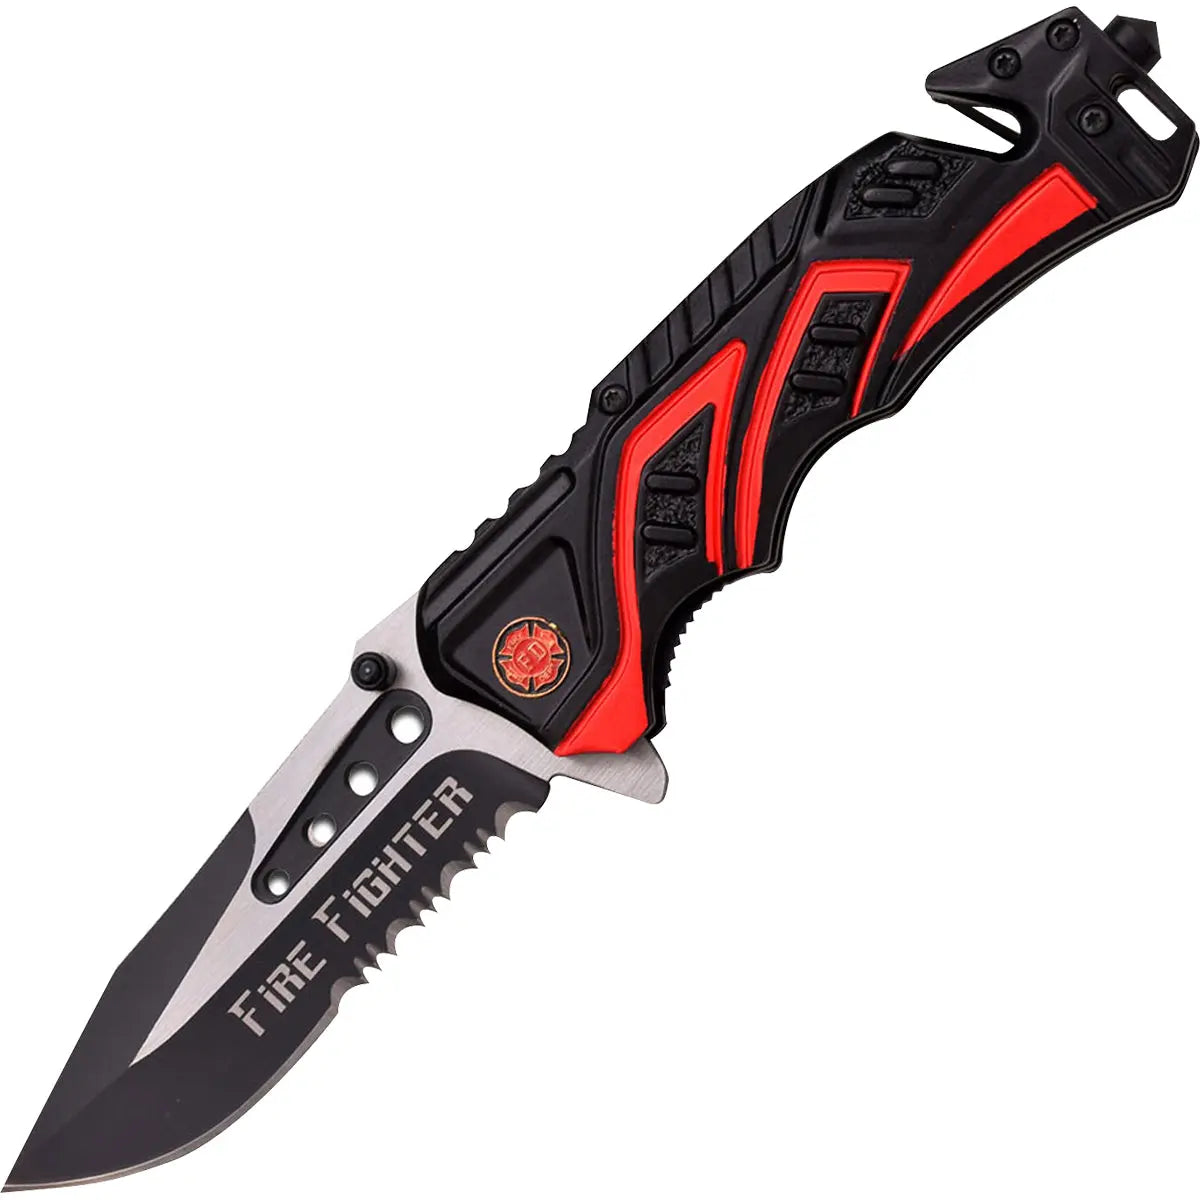 MTech USA Rescue Linerlock Spring Assisted Folding Knife, Fire Fighter MT-A865FD M-Tech